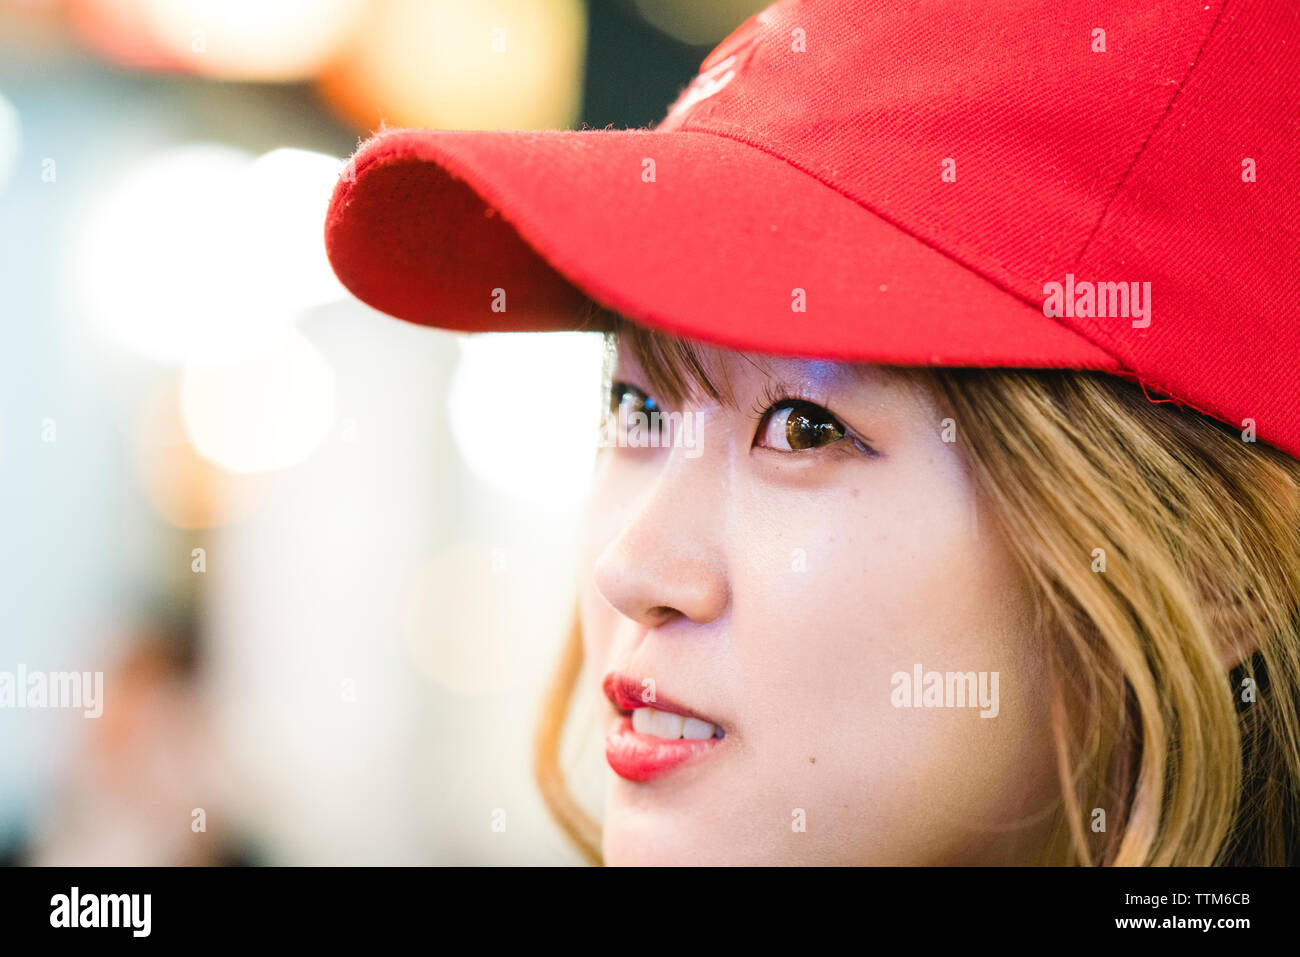 Close-up of thoughtful young woman wearing cap while looking away Stock Photo